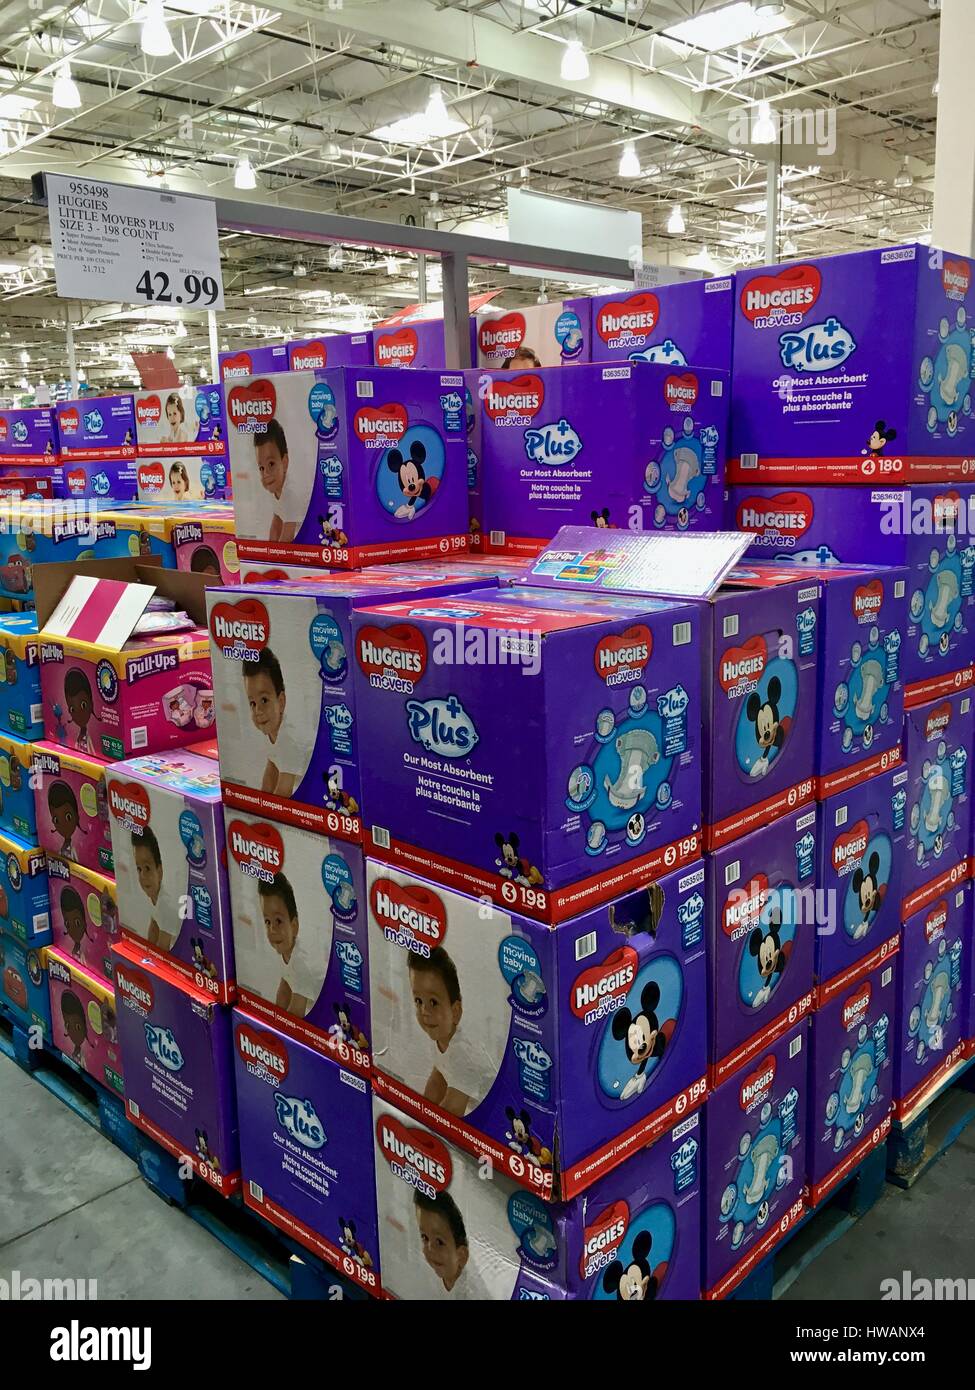 Costco Deals ?? huggies diapers Are On Sale 6 Off All, 59 OFF